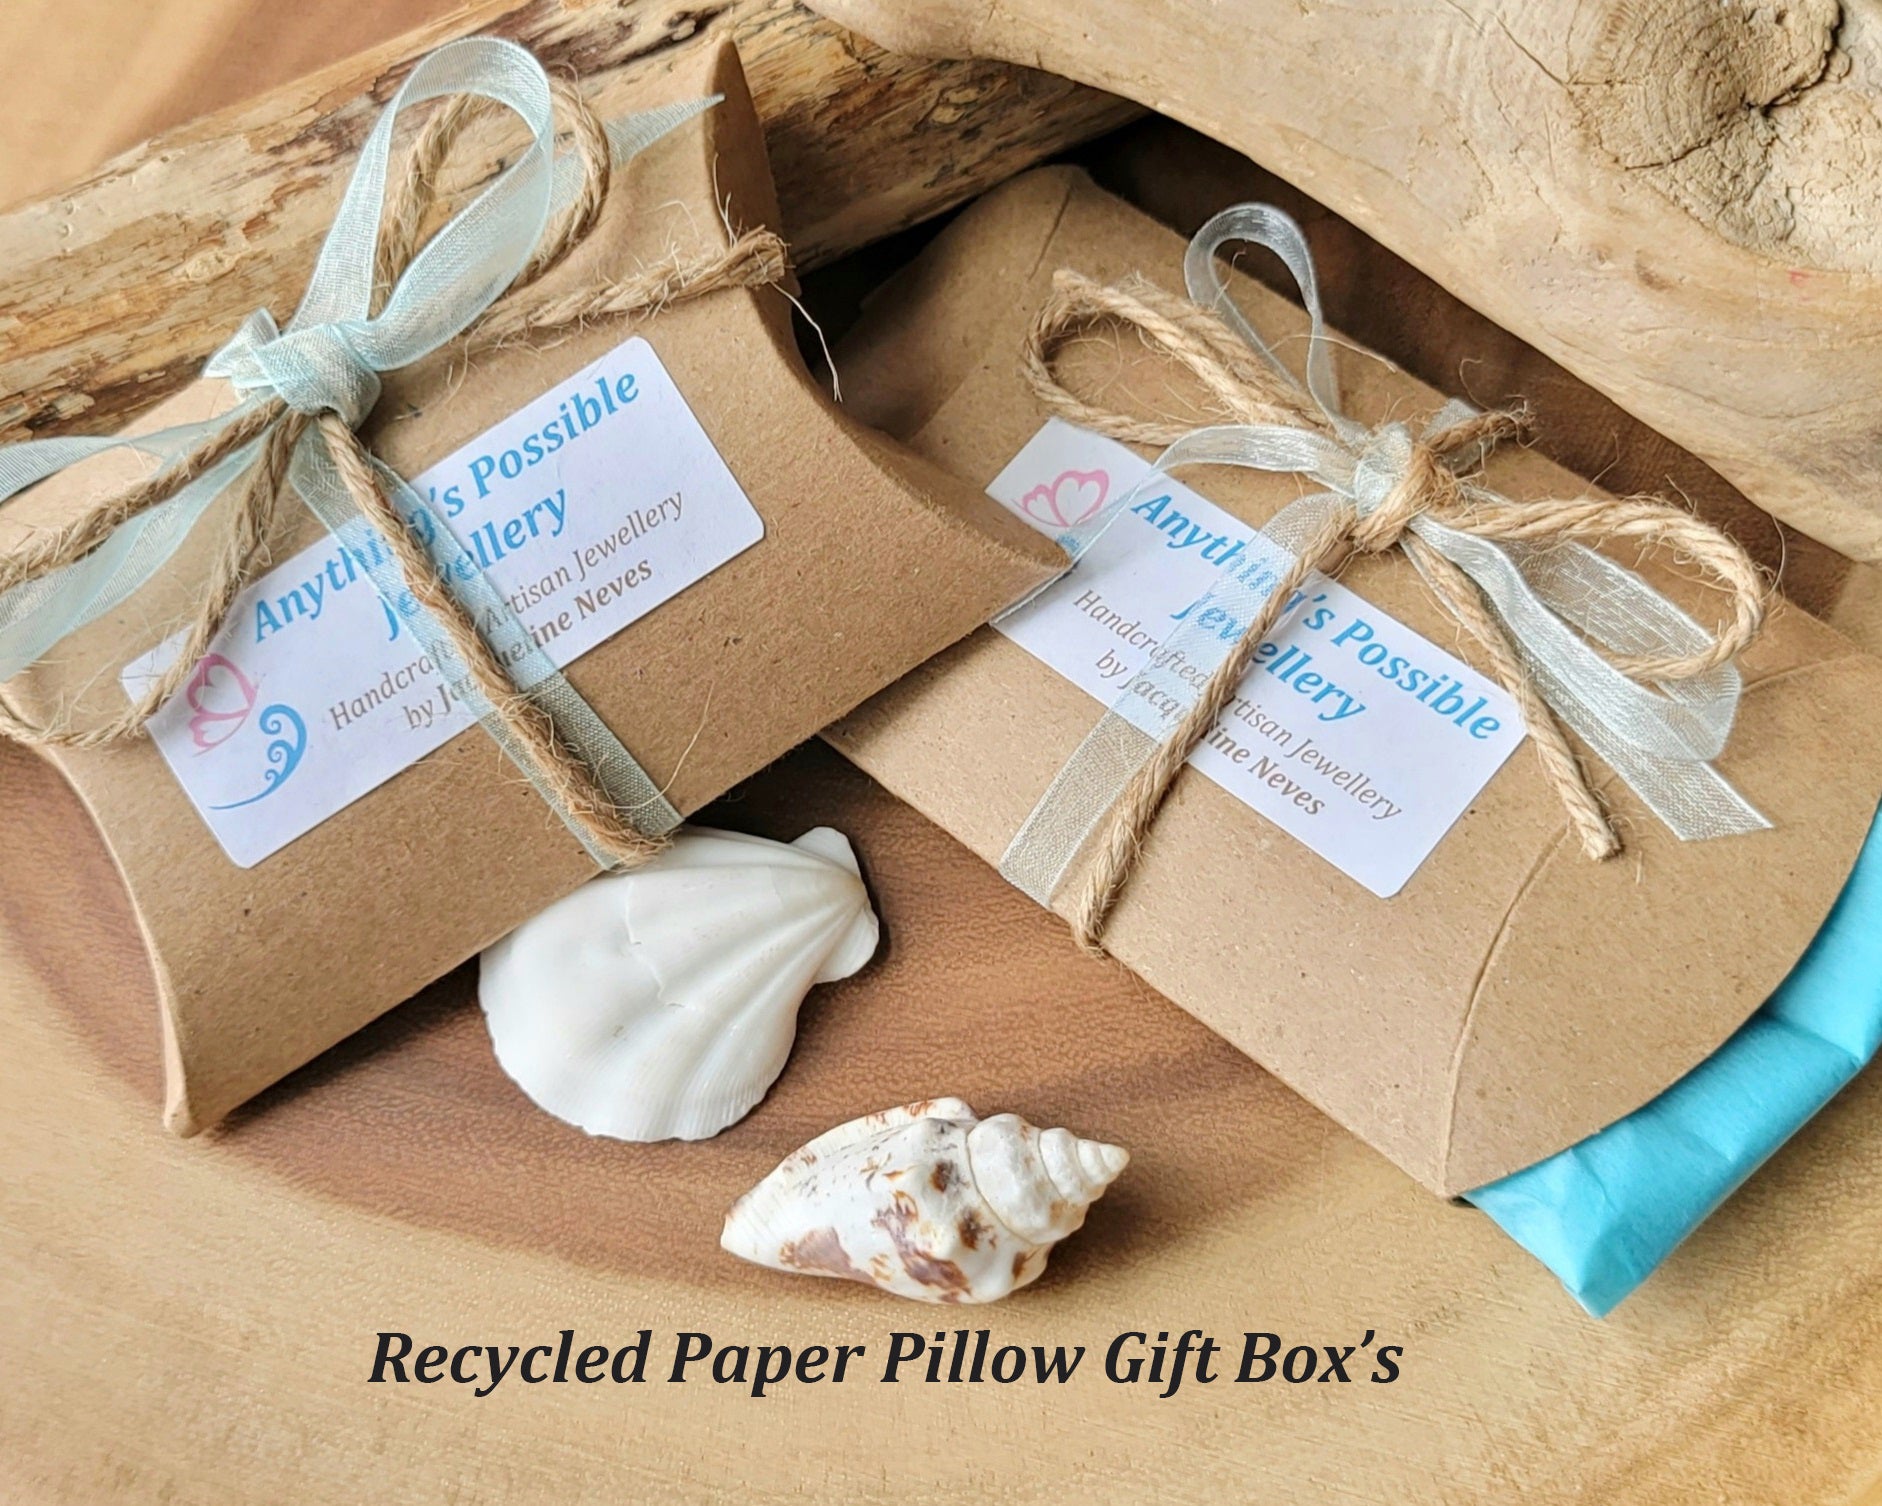 Recycled Paper Pillow Gift Box with Tissue, Ribbon and Twine